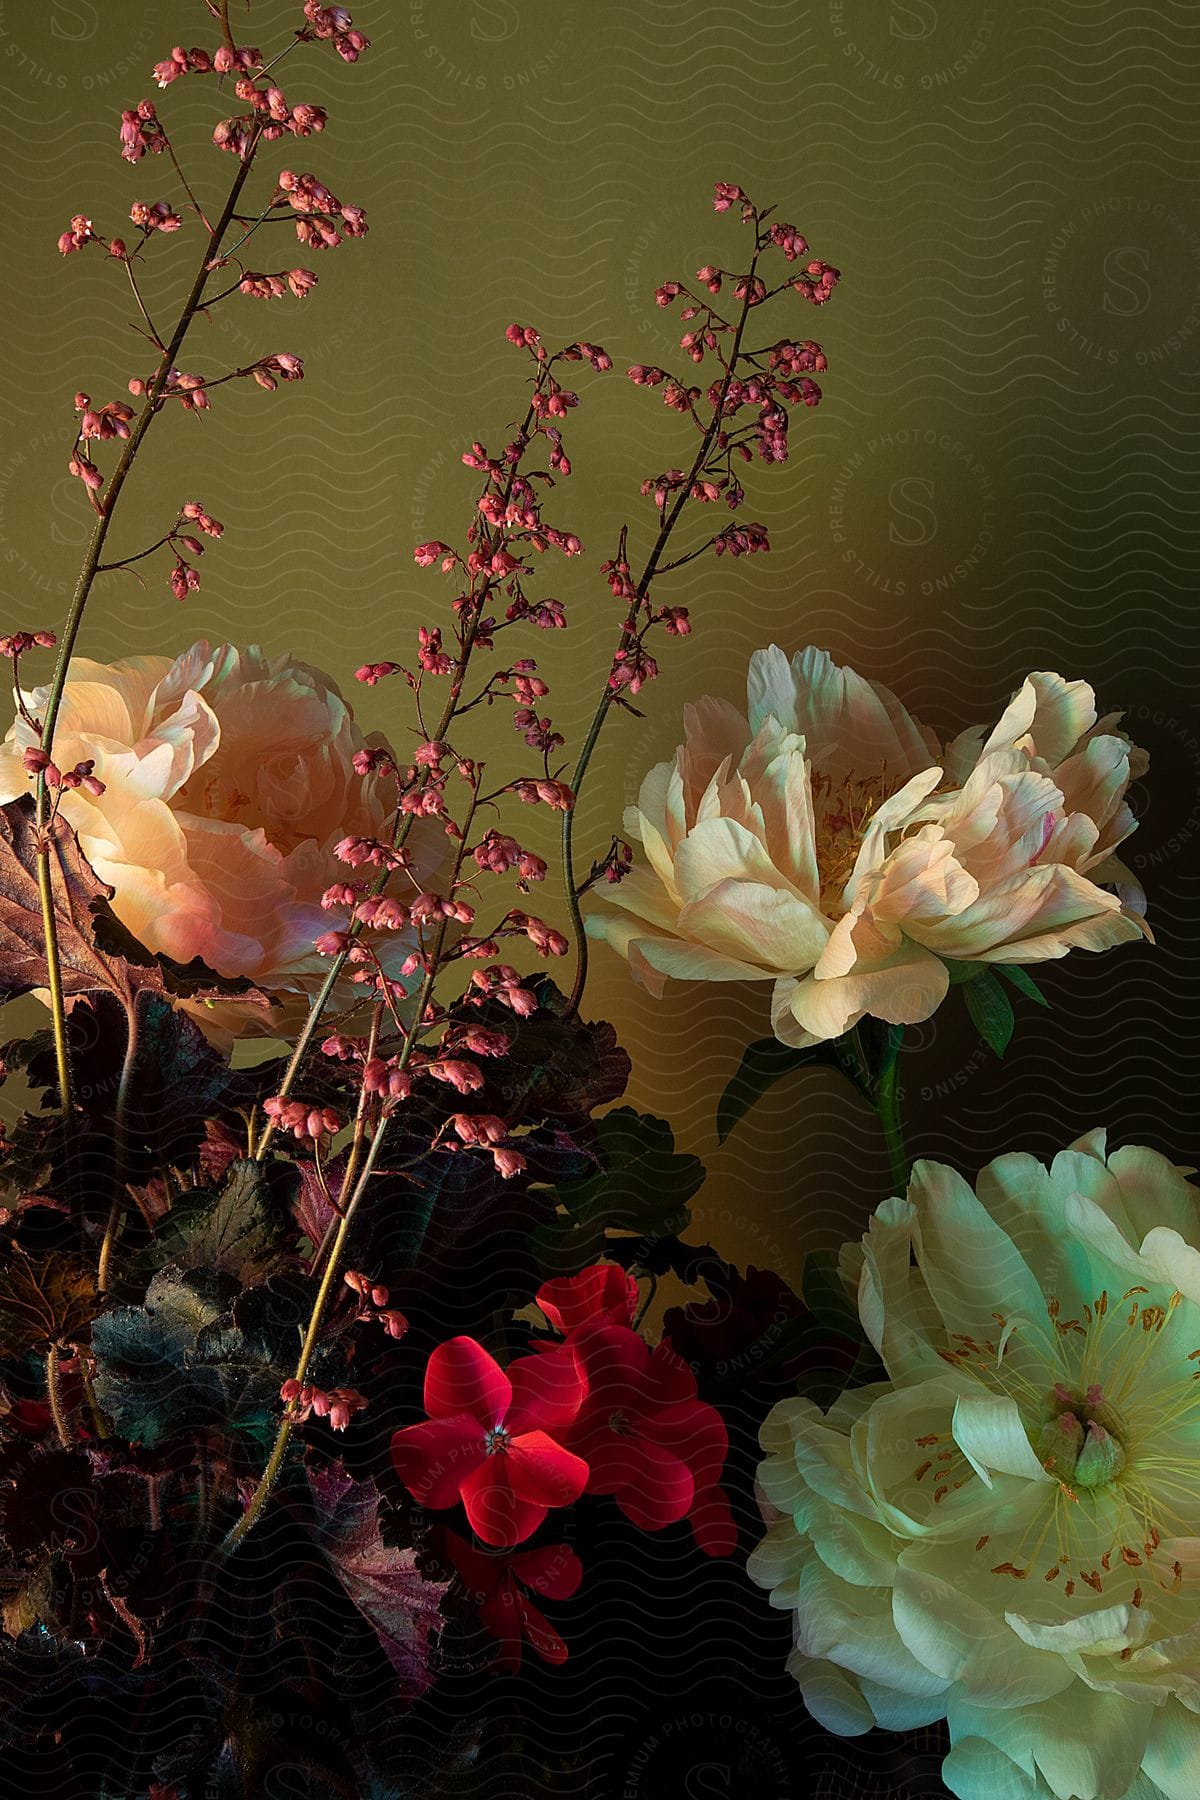 A series of beautiful flowers are illuminated against a dark background, creating an artistic effect.